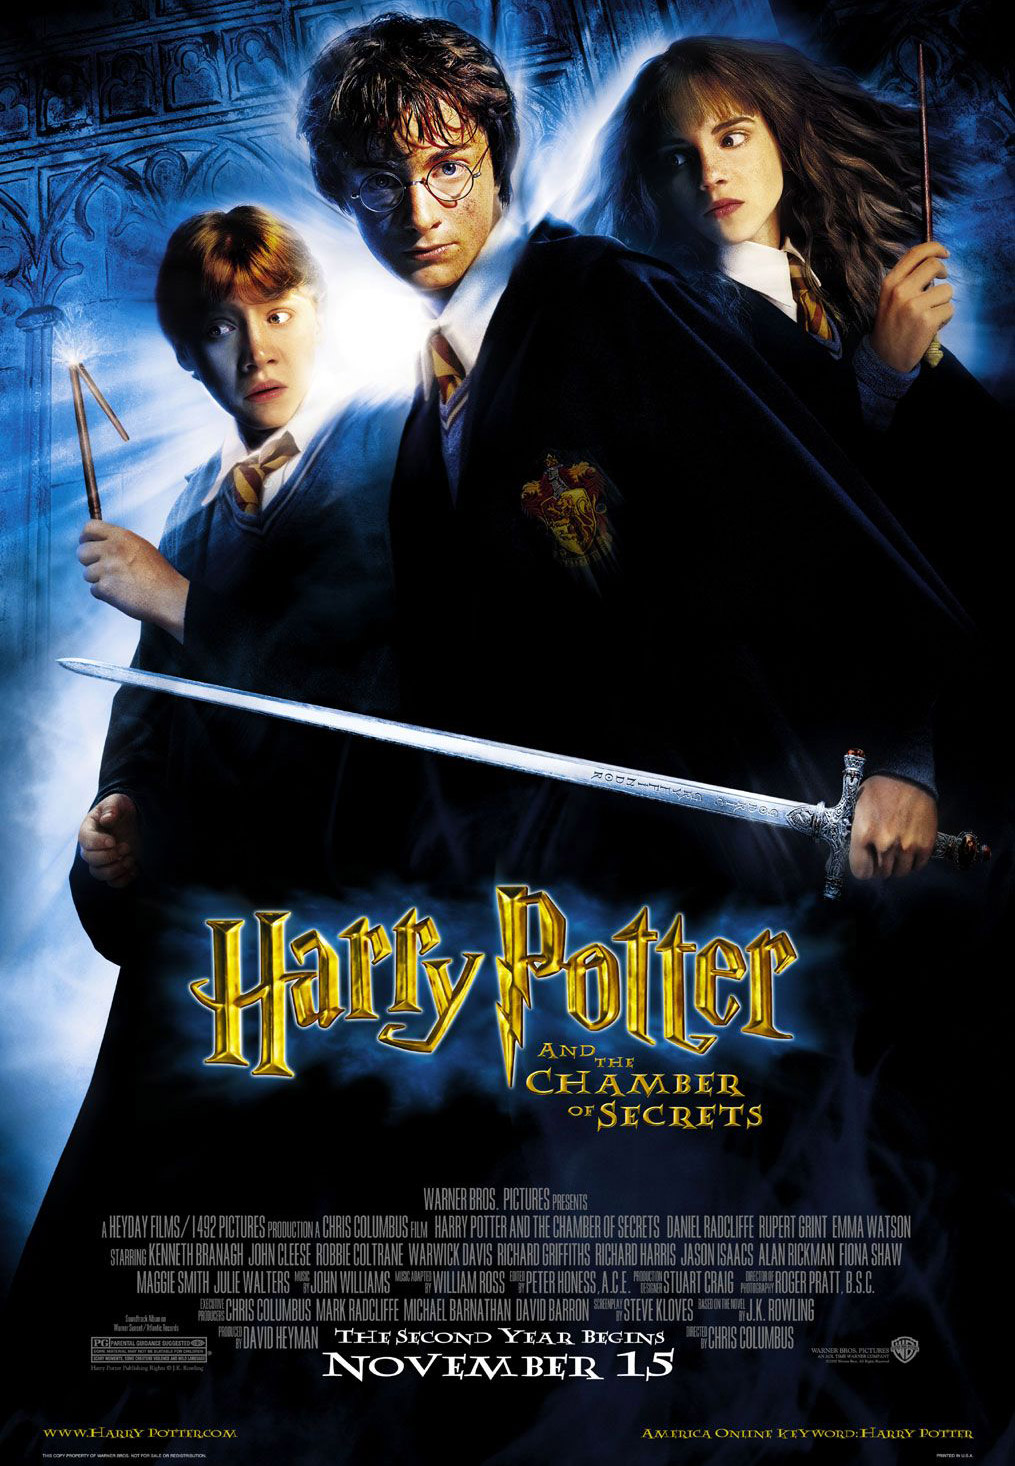 harry-potter-and-the-chamber-of-secrets-william-ross-composer